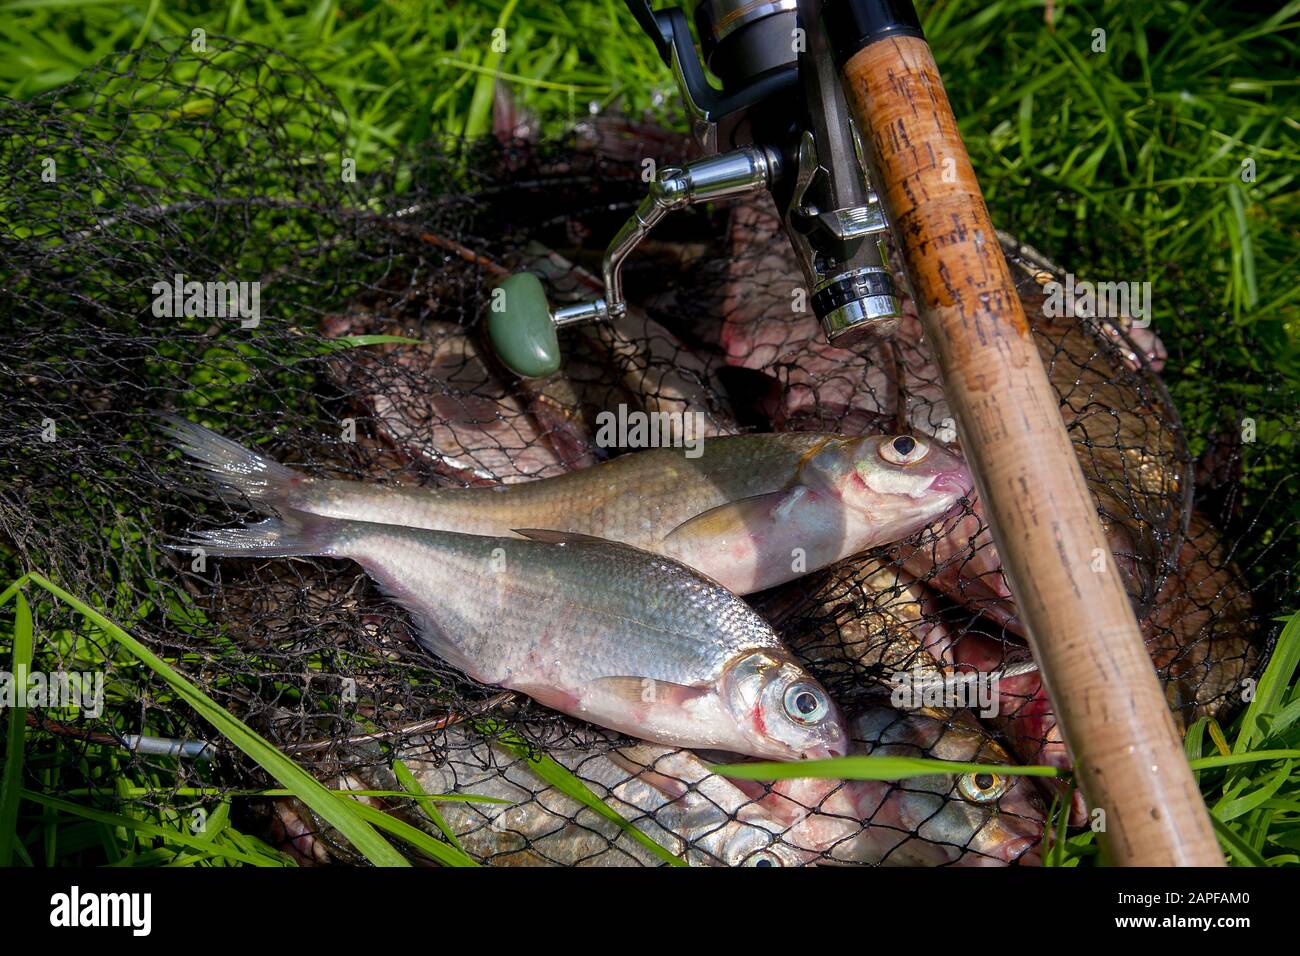 Fishing concept. Freshwater fish and fishing rods with reels on